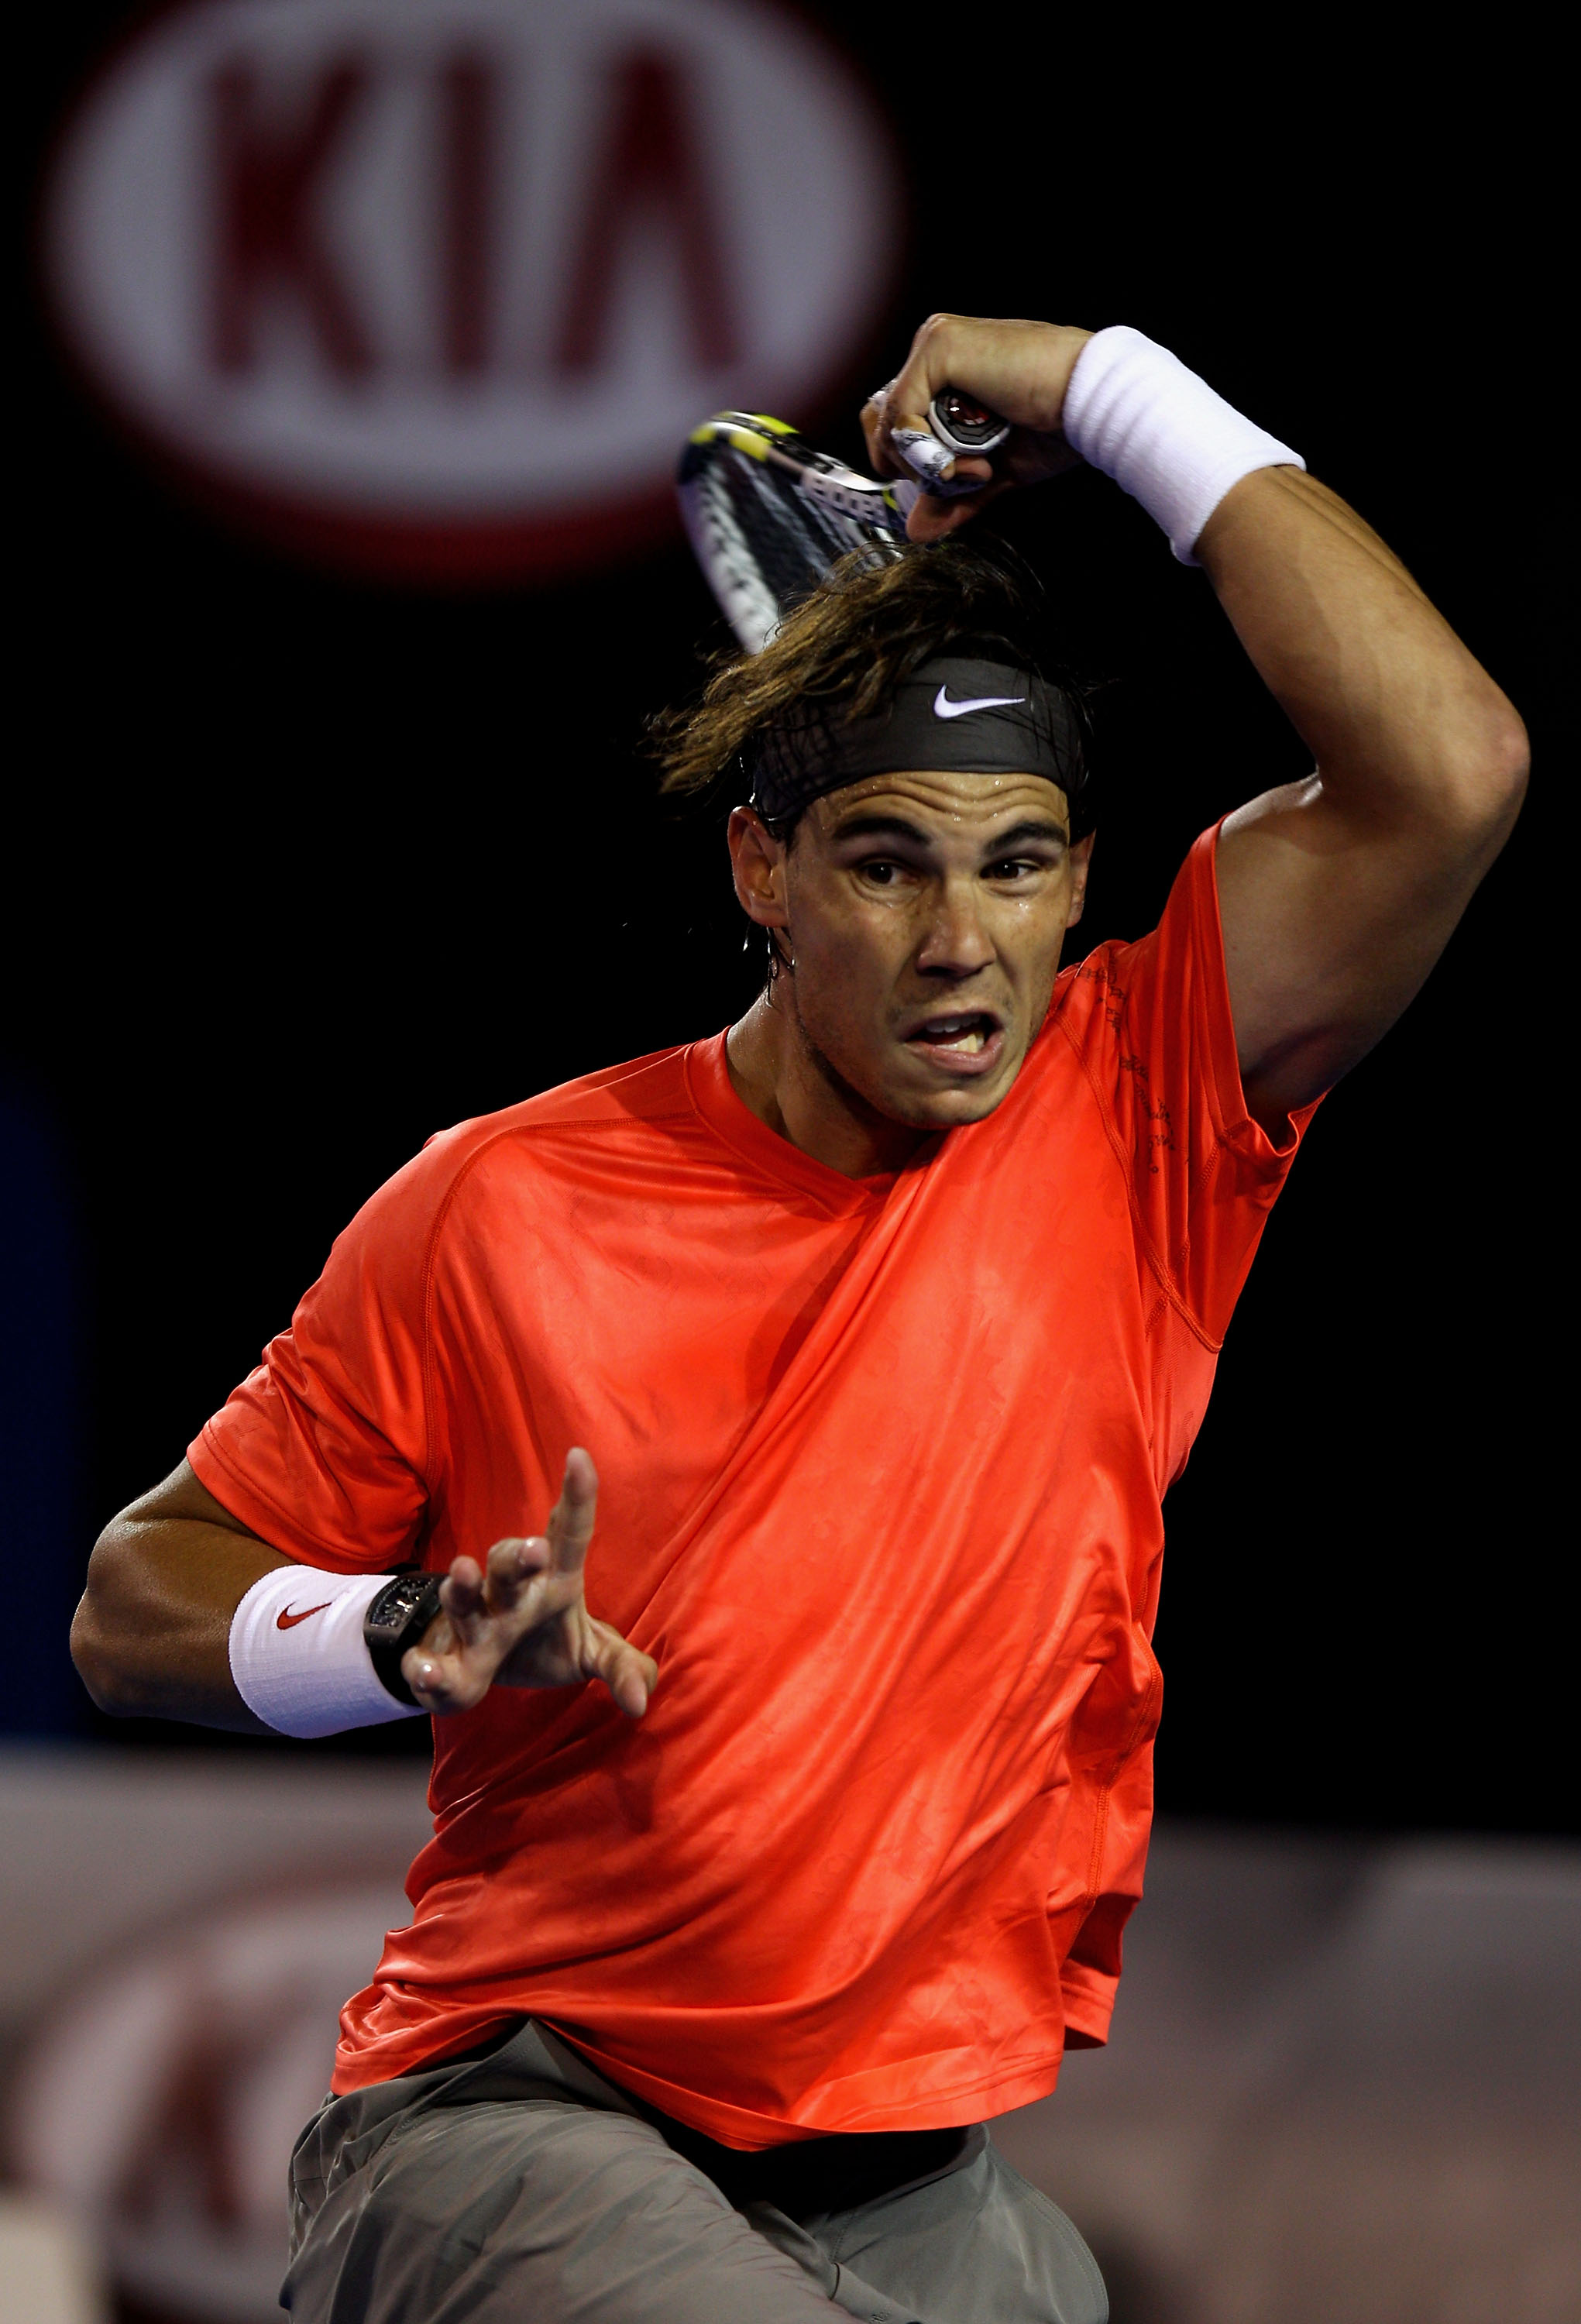 MELBOURNE, AUSTRALIA - JANUARY 24:  Rafael Nadal of Spain plays a forehand in his fourth round match against Marin Cilic of Croatia during day eight of the 2011 Australian Open at Melbourne Park on January 24, 2011 in Melbourne, Australia.  (Photo by Mark